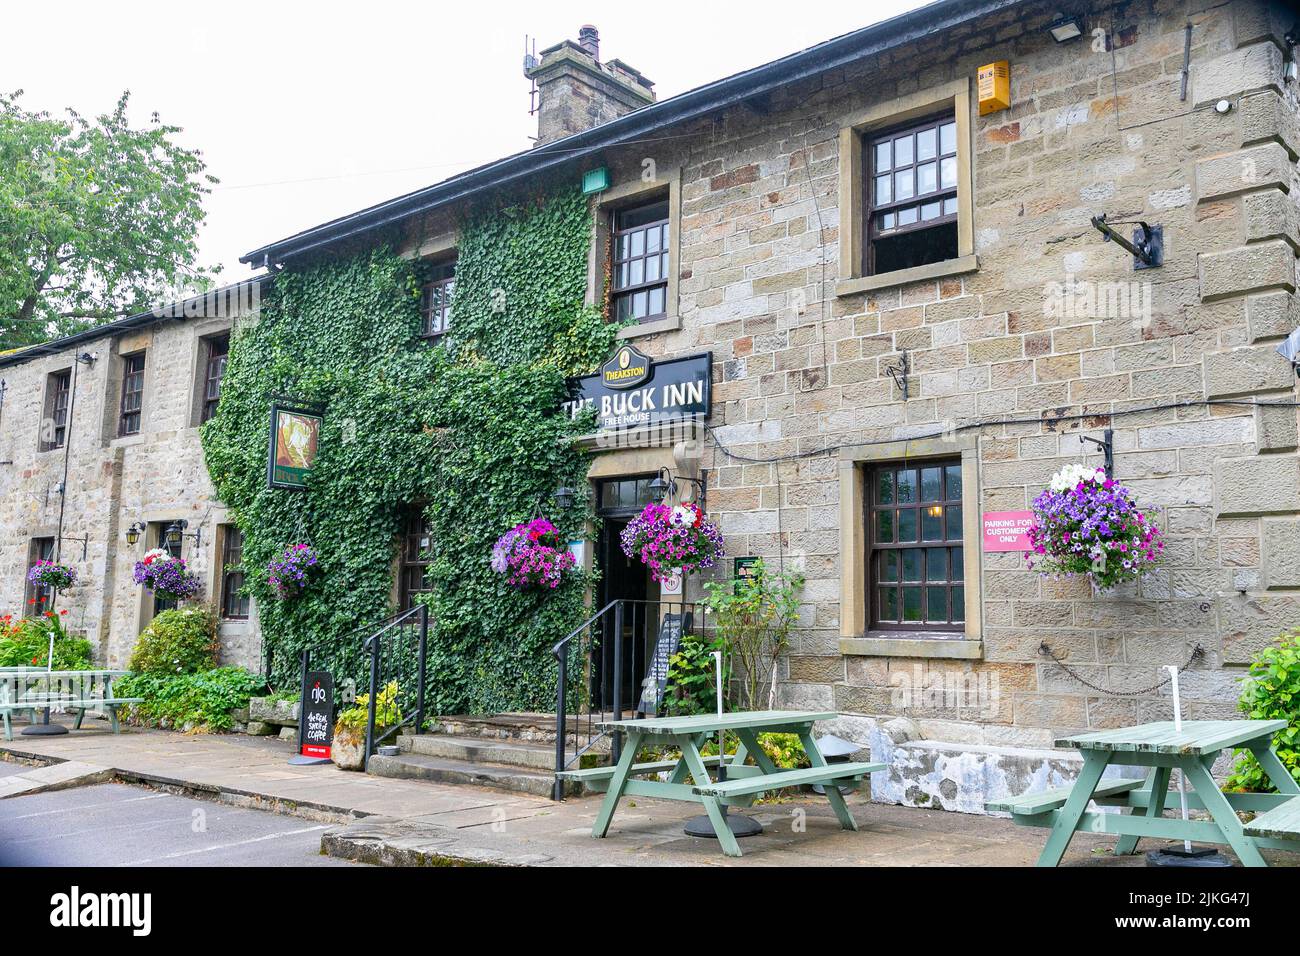 The Buck Inn pub and restaurant in the Yorkshire village of Buckden, Yorkshire Dales,England,Uk summers day 2022 Stock Photo